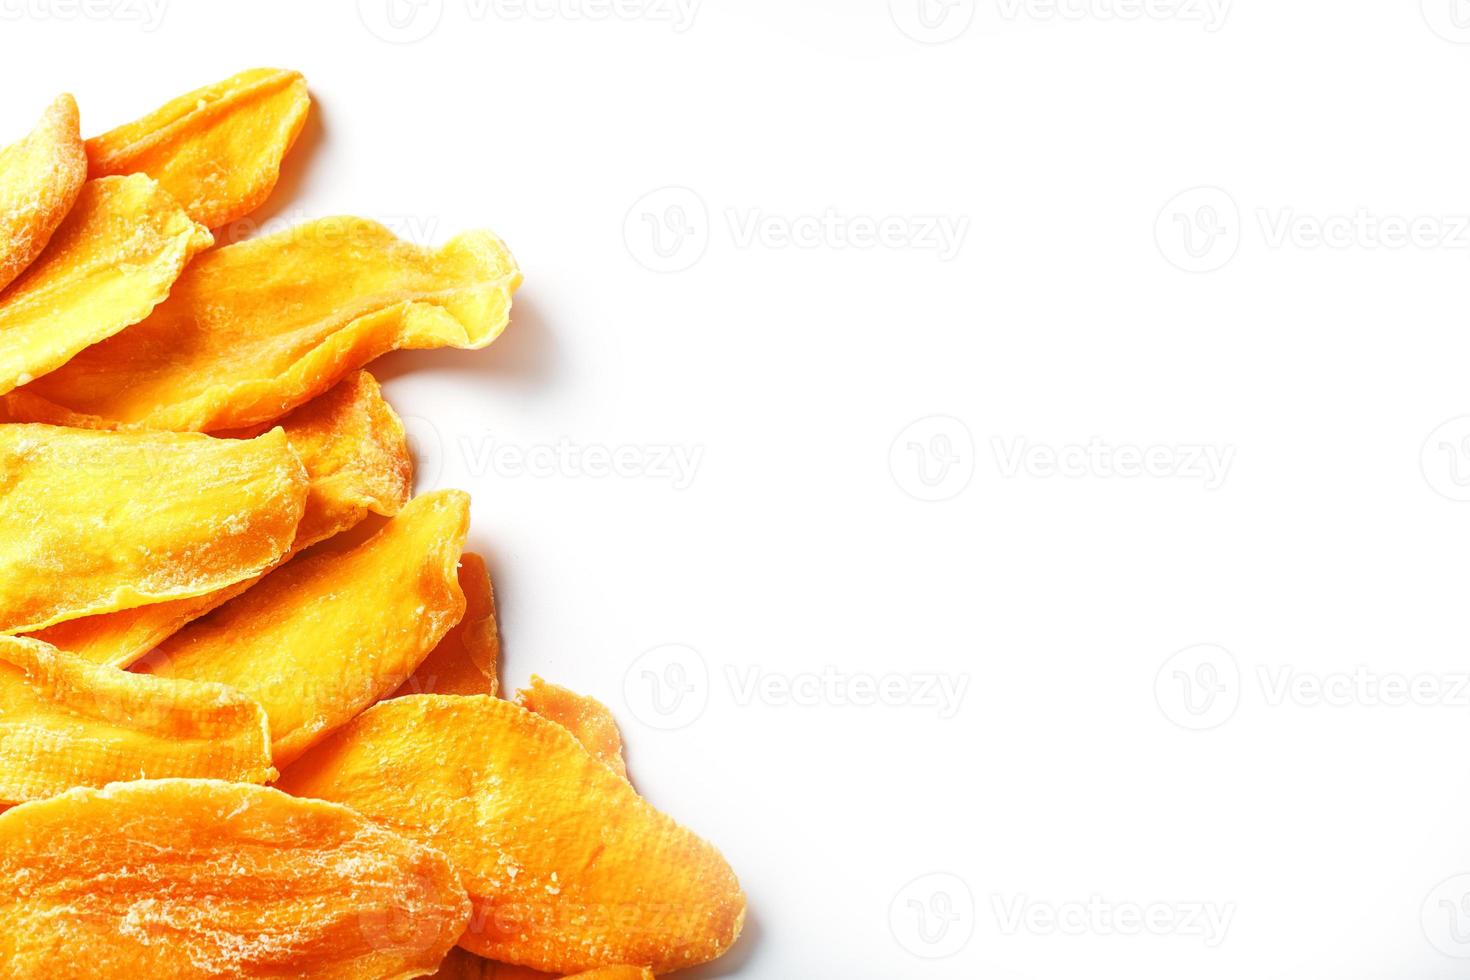 Dried mango sliced on a white background with free space photo